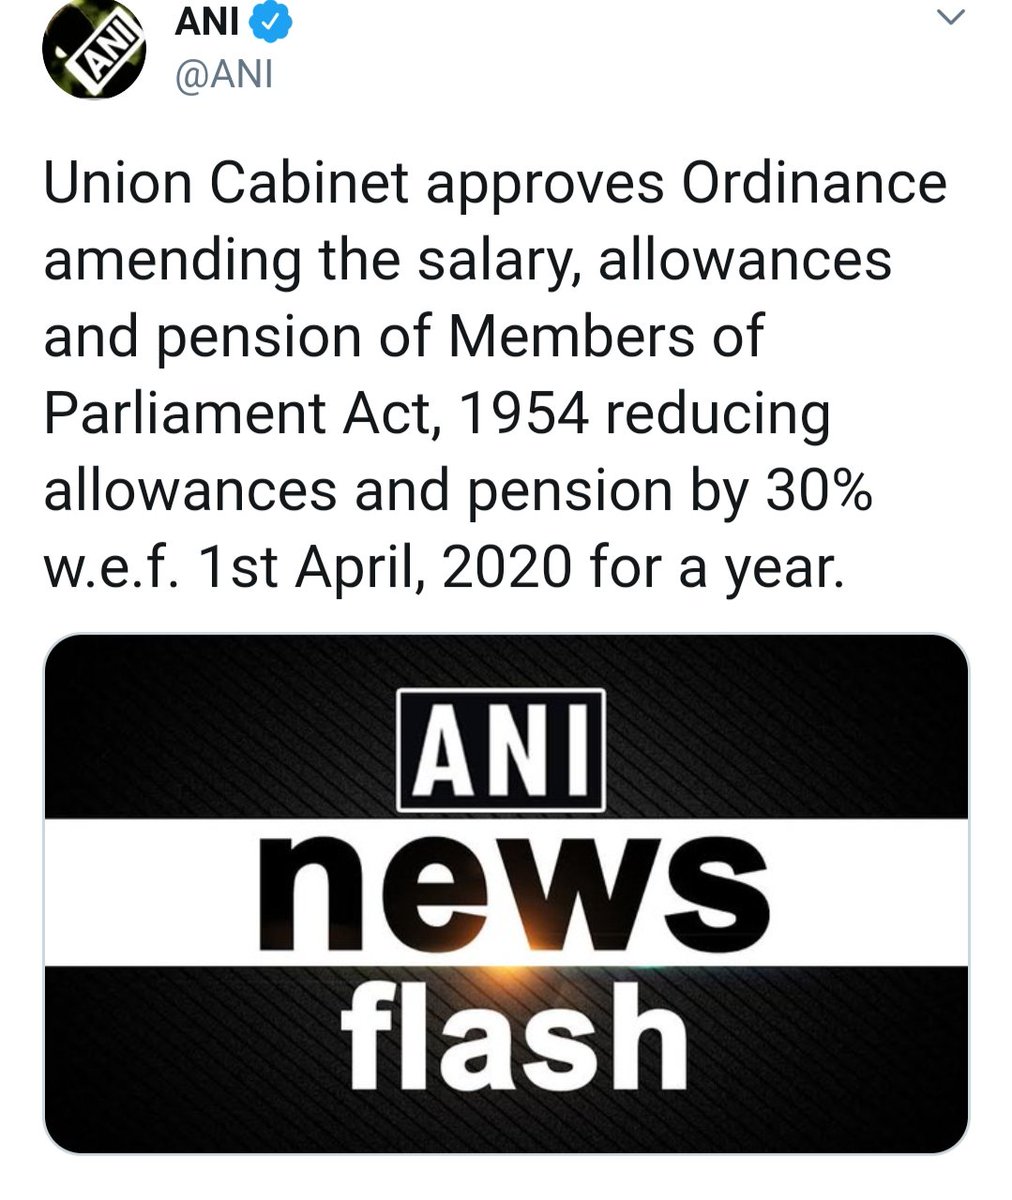  #FYI:Another significant decision taken is reducing the salary, allowances and pension of MPs by 30% w.e.f. from 01/04/2020 Now some say,it would save merely 60 Cr rupeesSo why this hype ?1/n